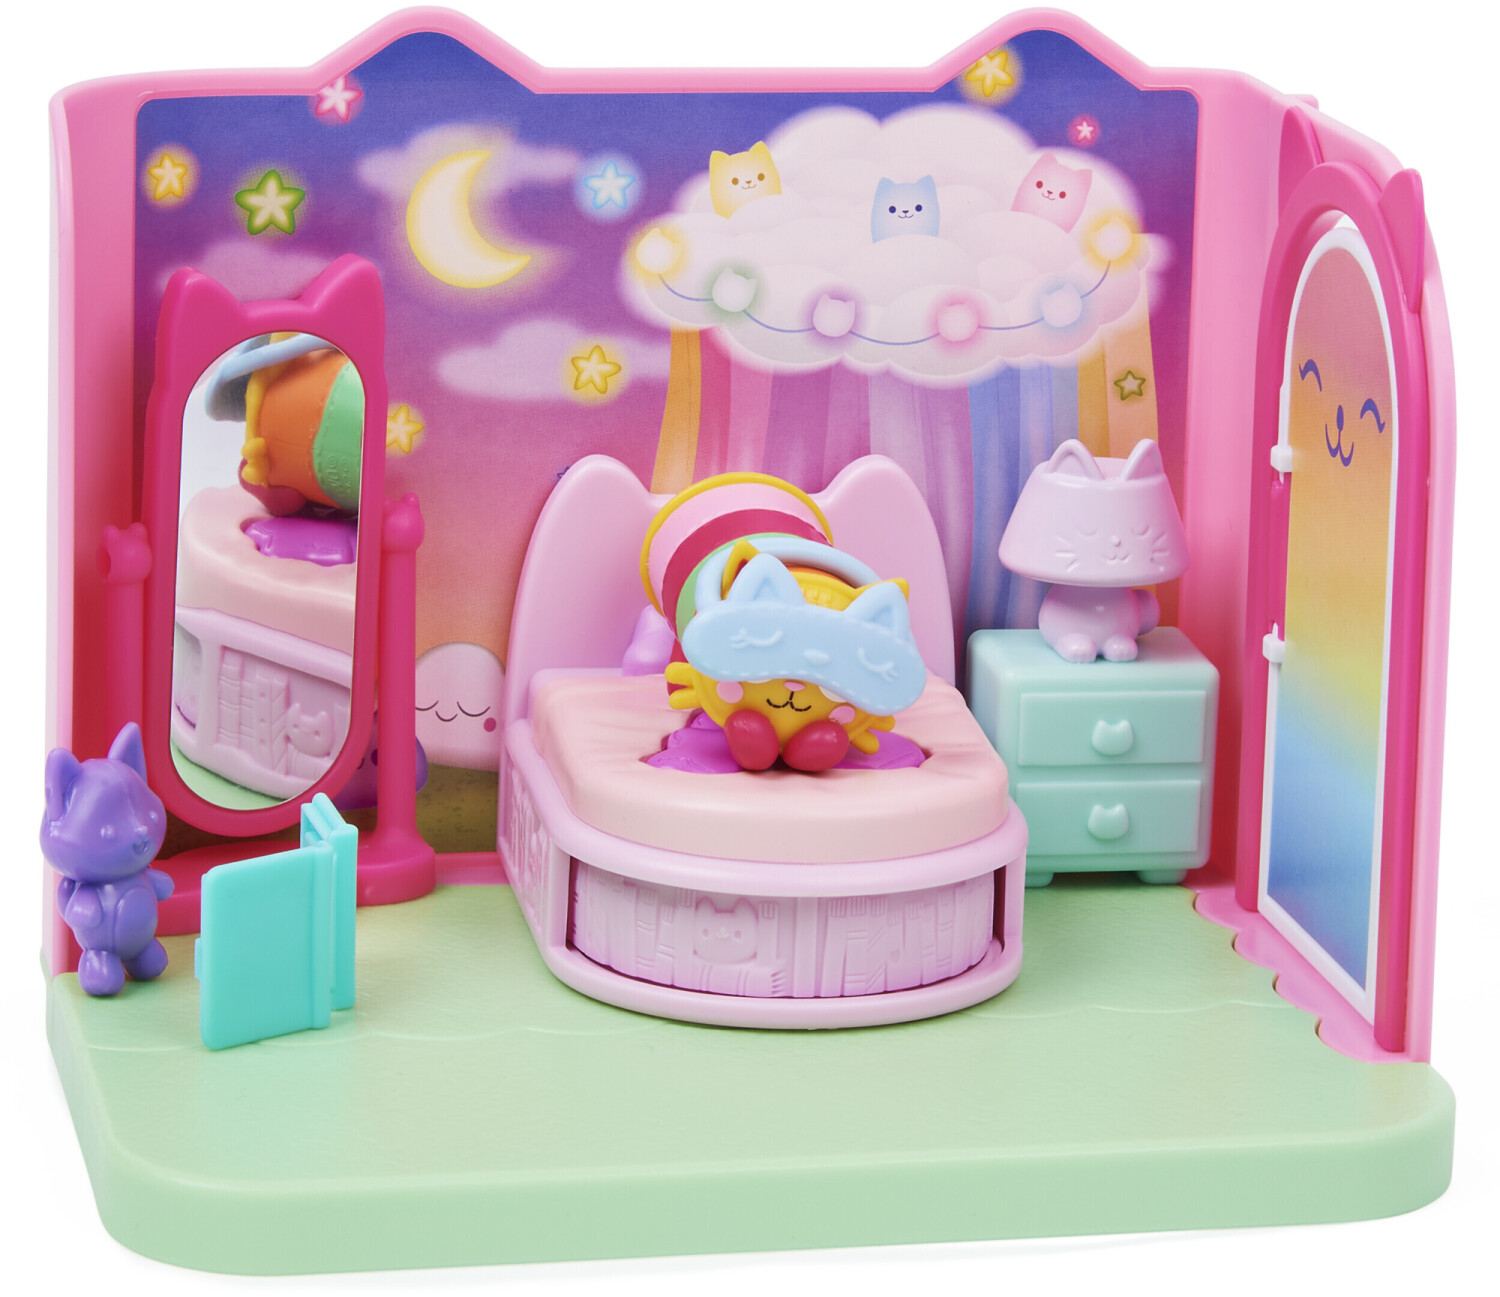 Gabby's Dollhouse Kitty White Toy Camera Spin Master - Cdiscount Jeux -  Jouets